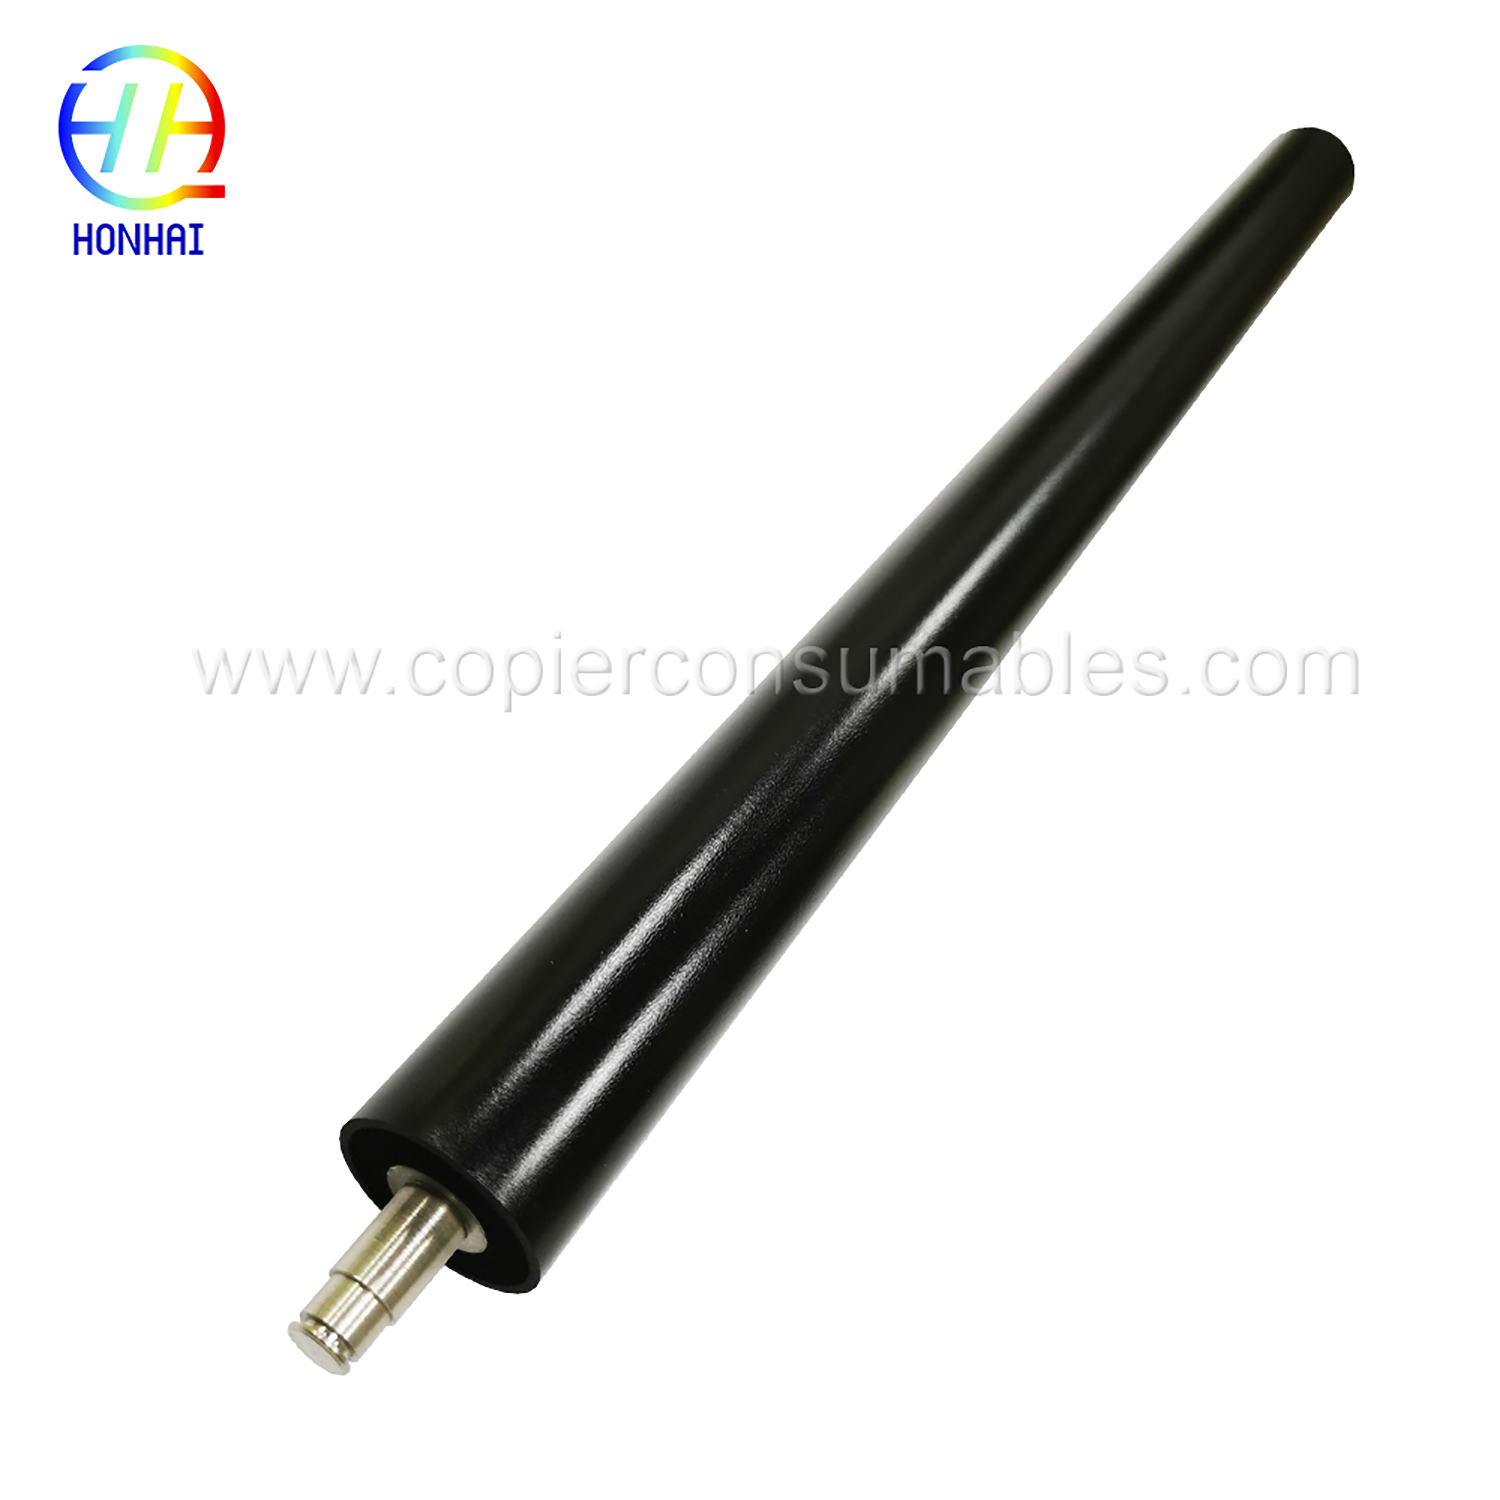 Hot Sale for Heated Sponge Rollers - 2nd Transfer Roller for Xerox DCC5065 7500 7550 6550 242 7600 250 7775 – HONHAI